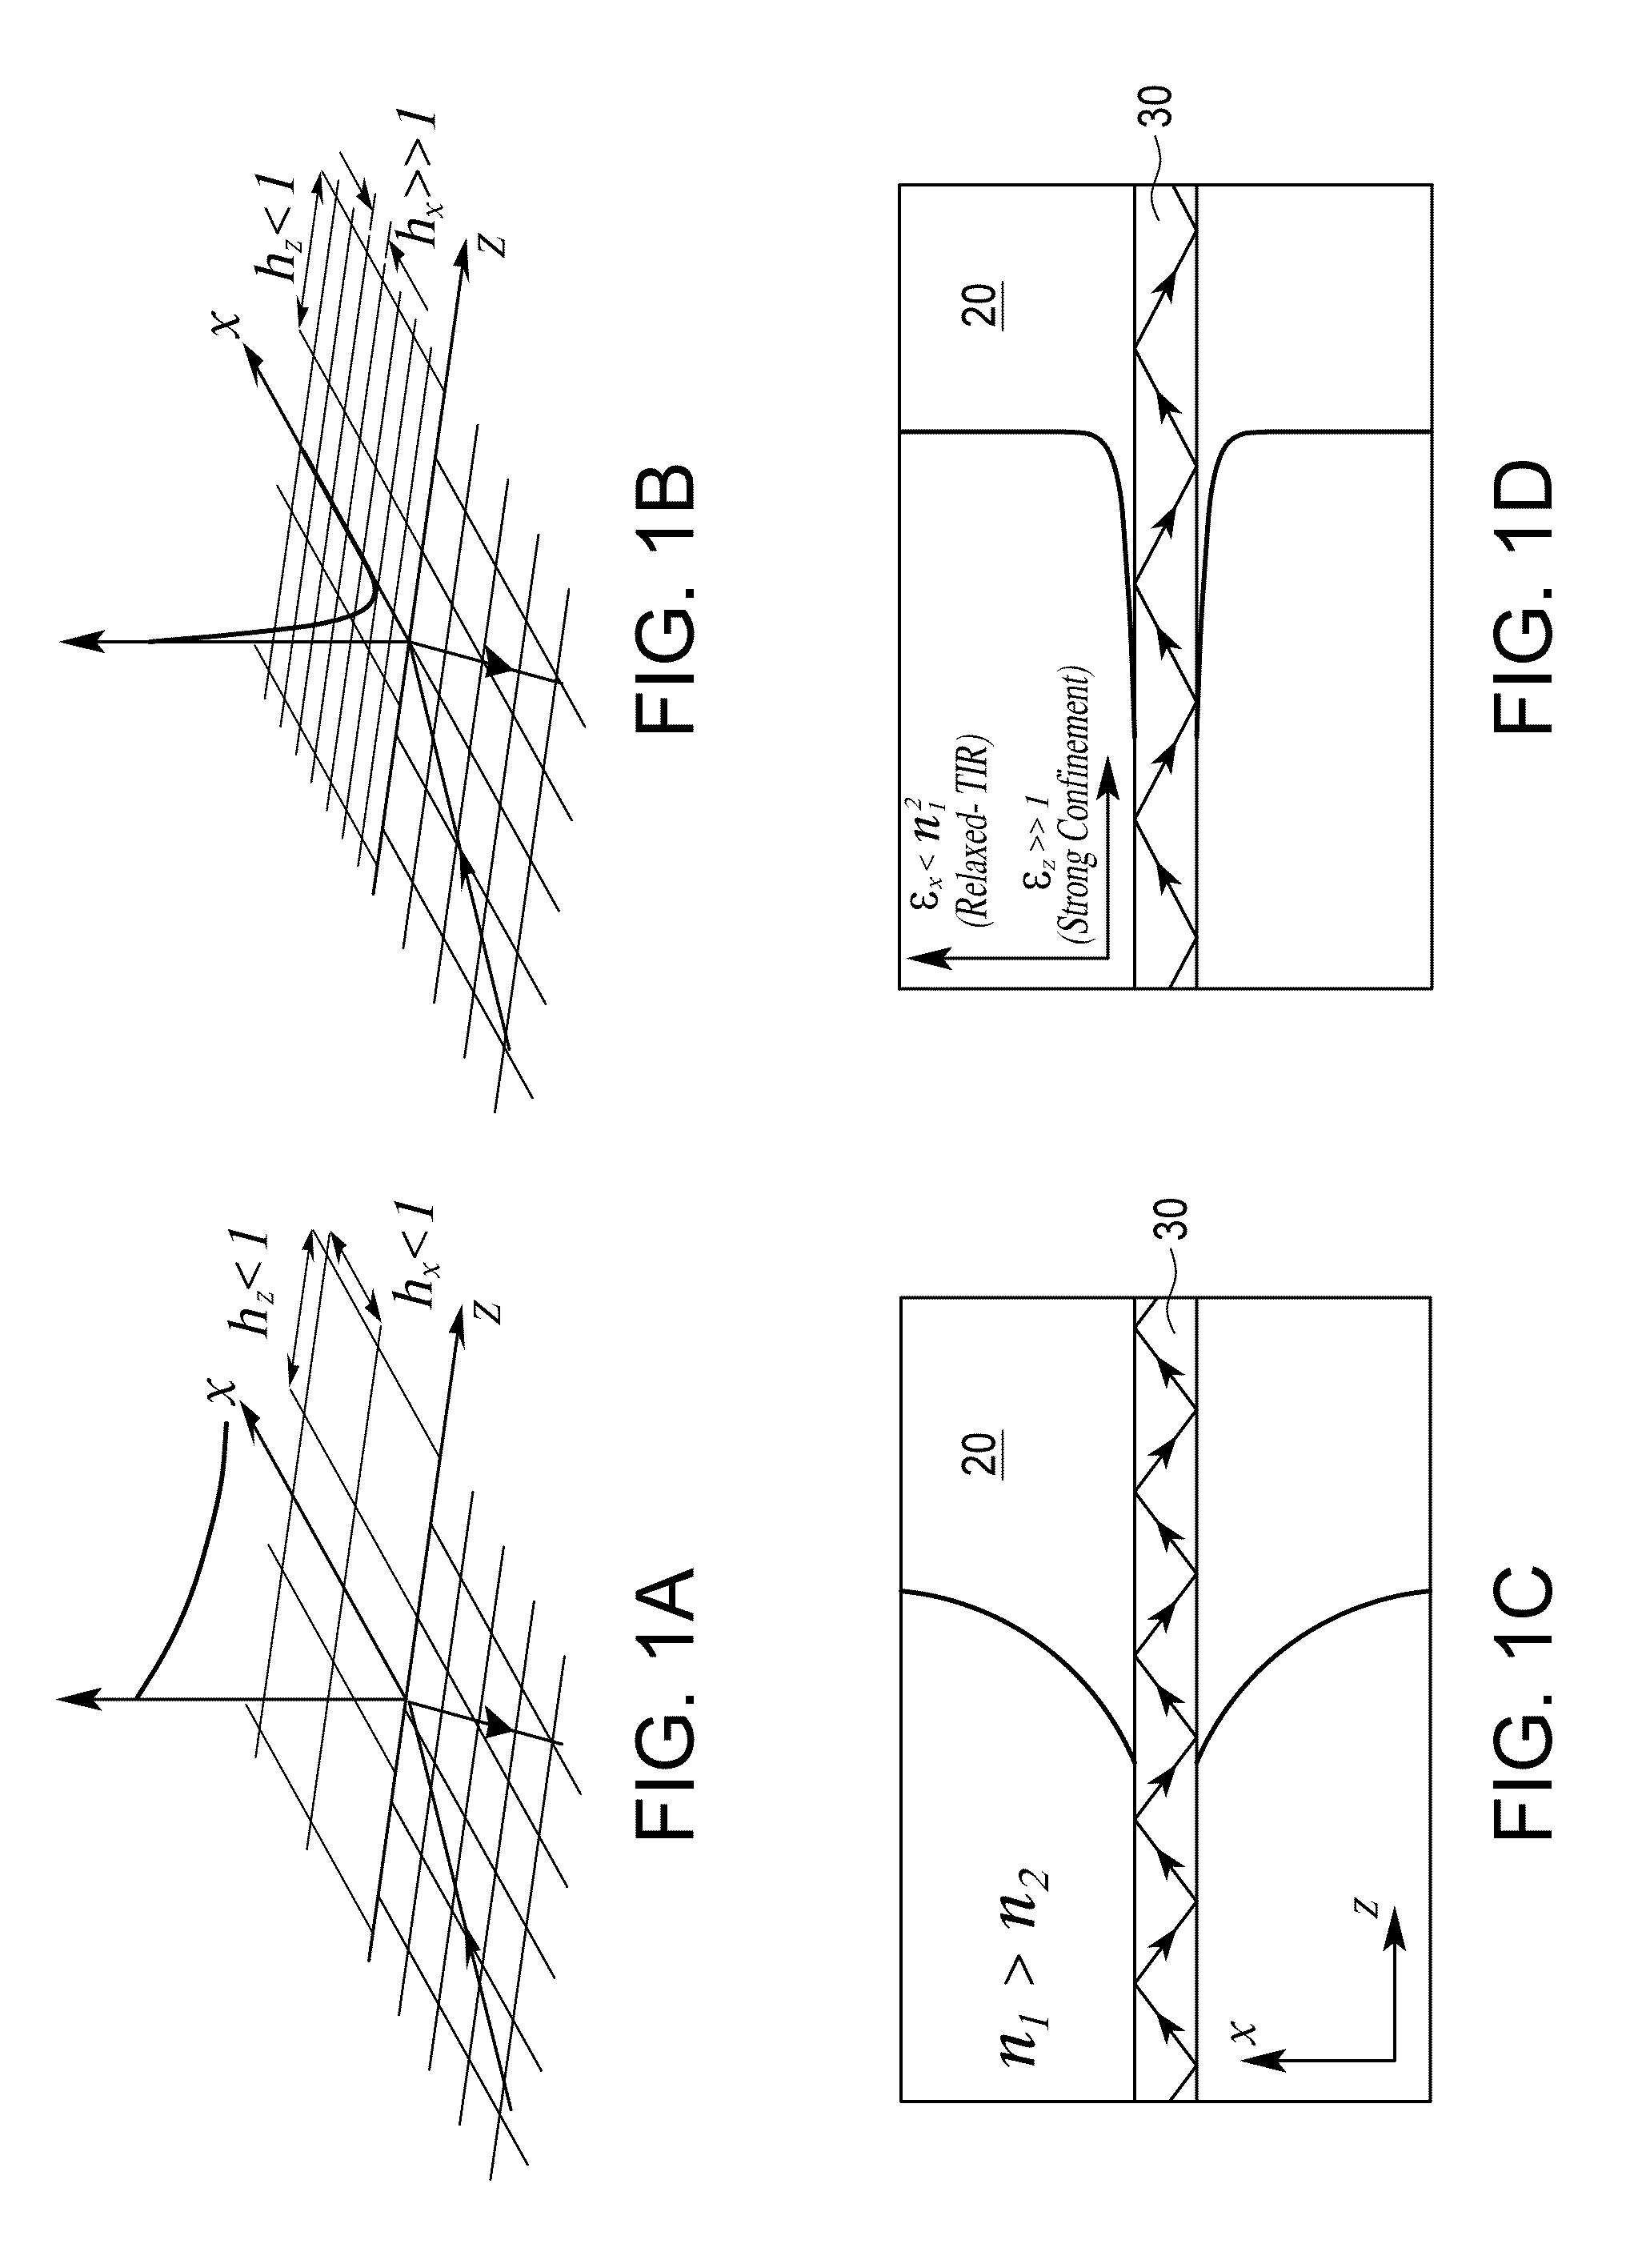 Light confining devices using all-dielectric metamaterial cladding